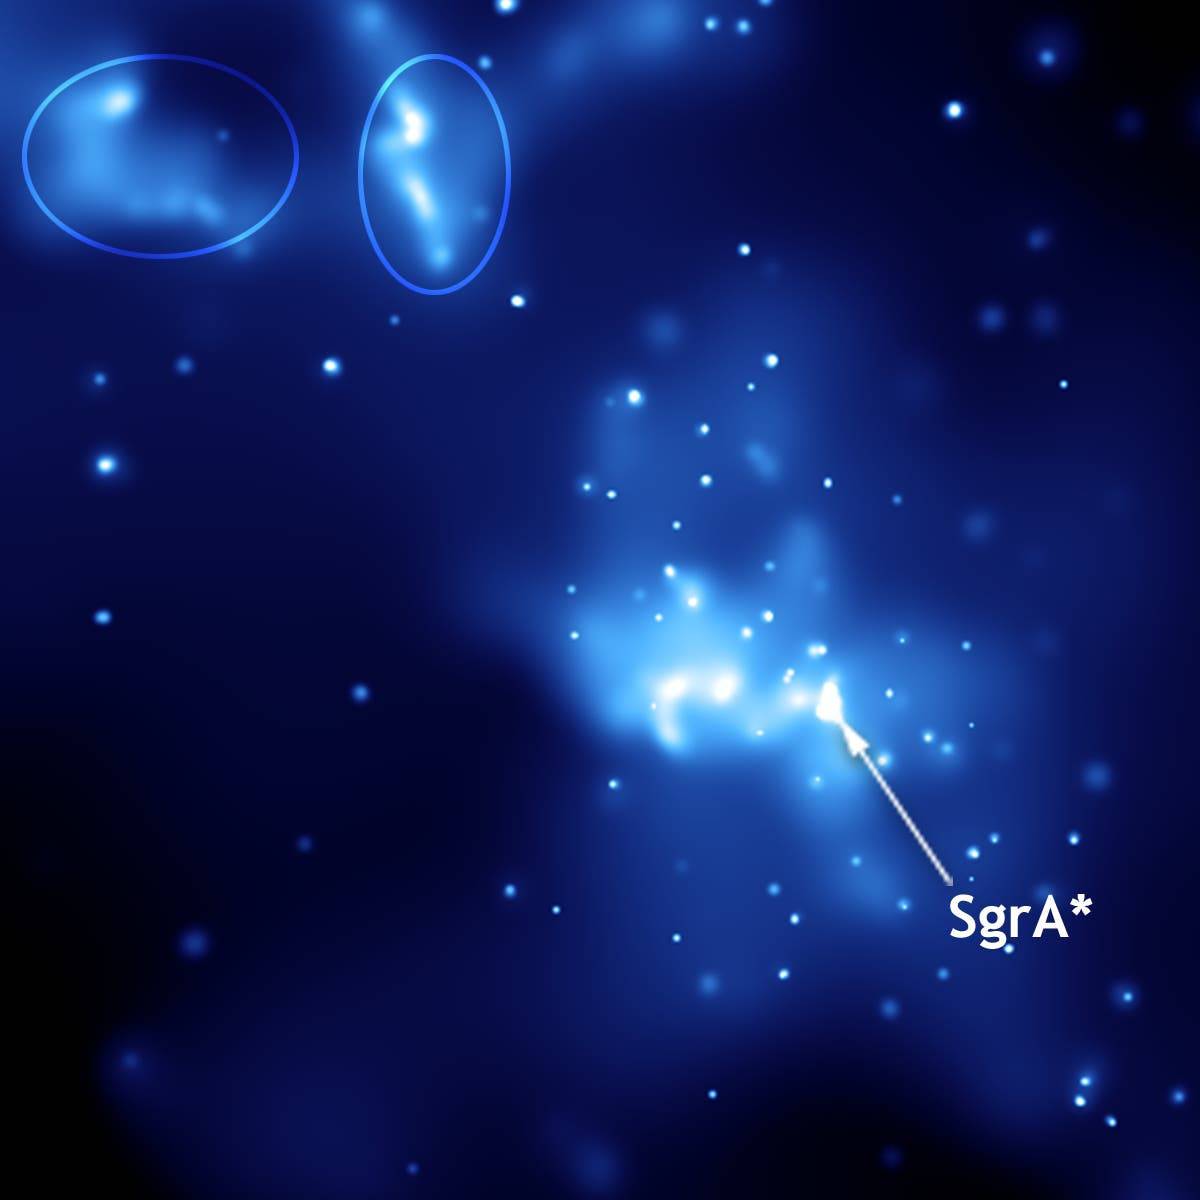 Sagittarius A*, the black hole at the centre of our own galaxy. This image was taken with NASA's Chandra X-Ray Observatory.